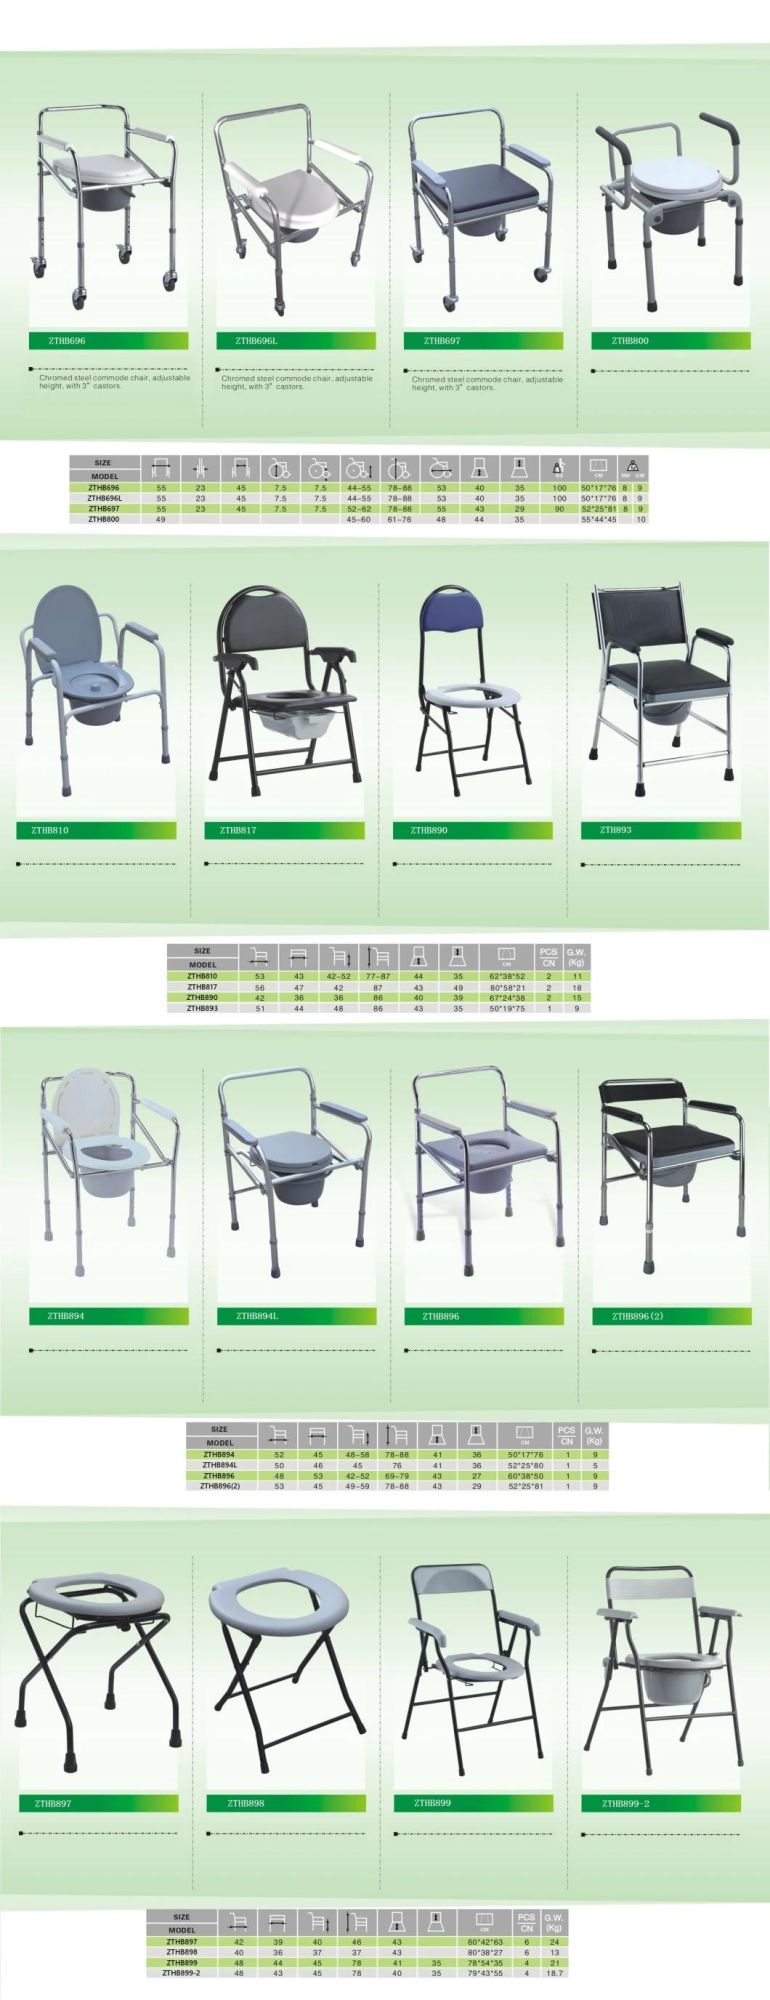 Easy Carry Outdoor Antiskid Folding Lightweight Commode Toilet Seat Elderly/Disable Patient People Rehabilitation Care Products Steel Nursing Chair